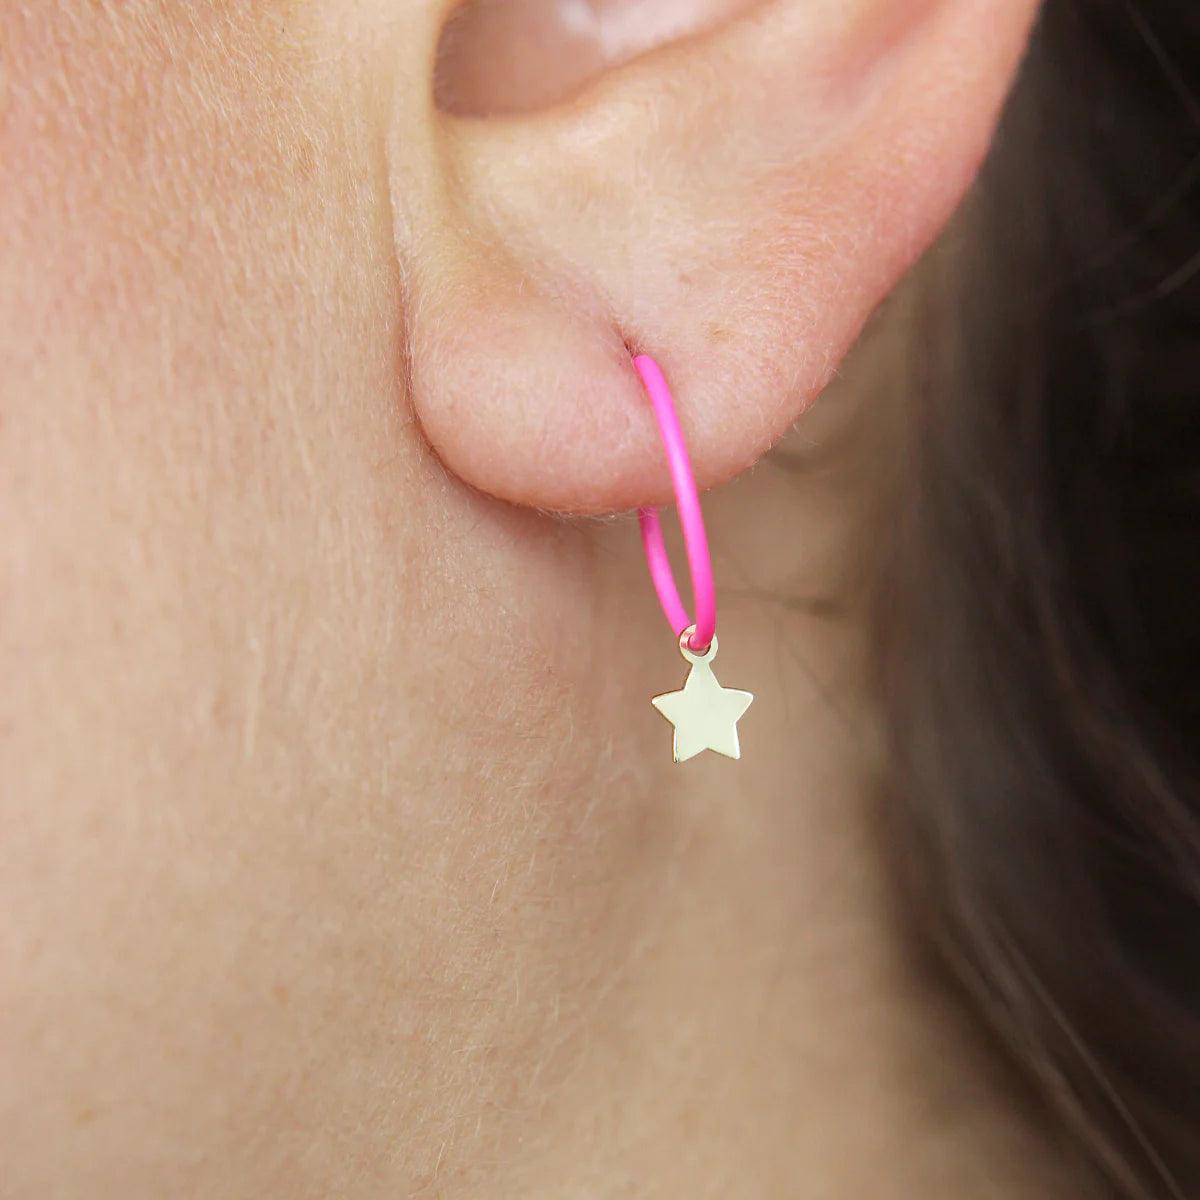 Mono Earring with 18kt gold star and painted silver hoop - Moregola Fine Jewelry